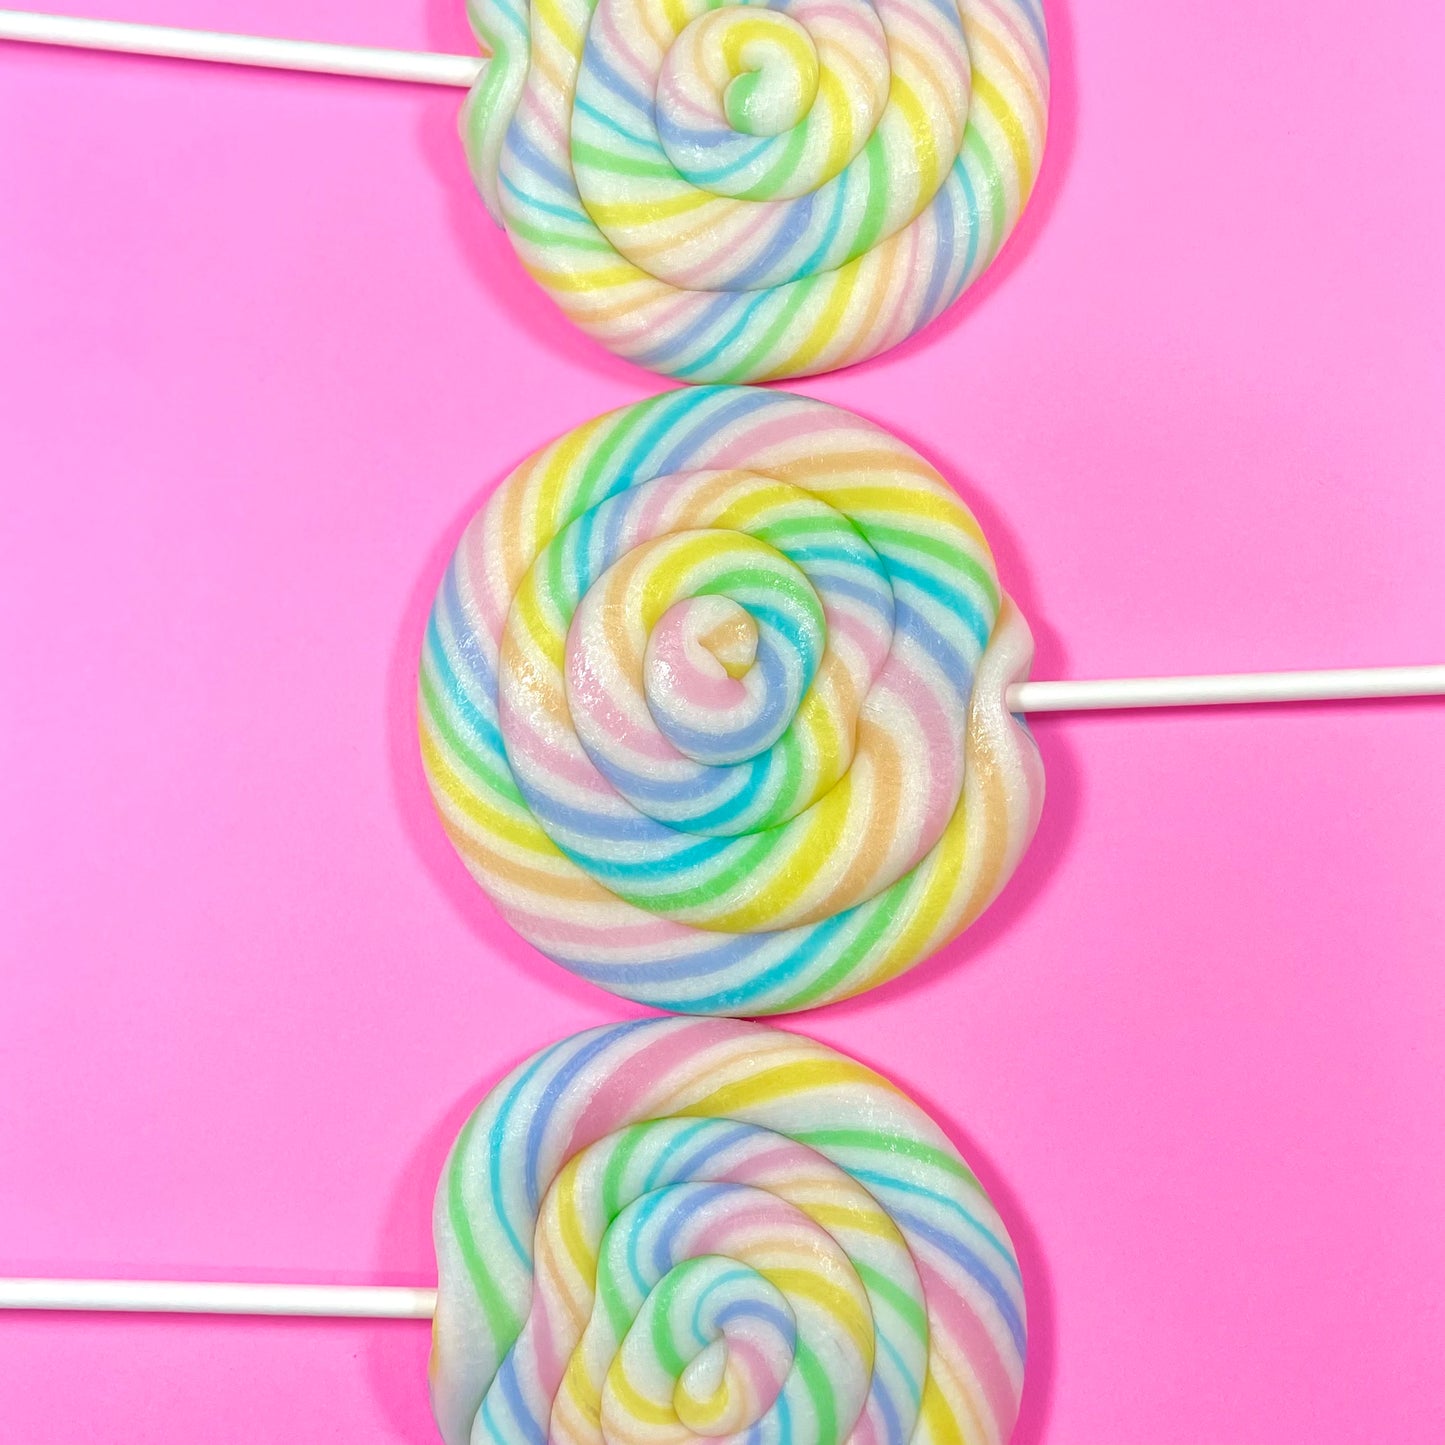 2" Whirly Lollipops